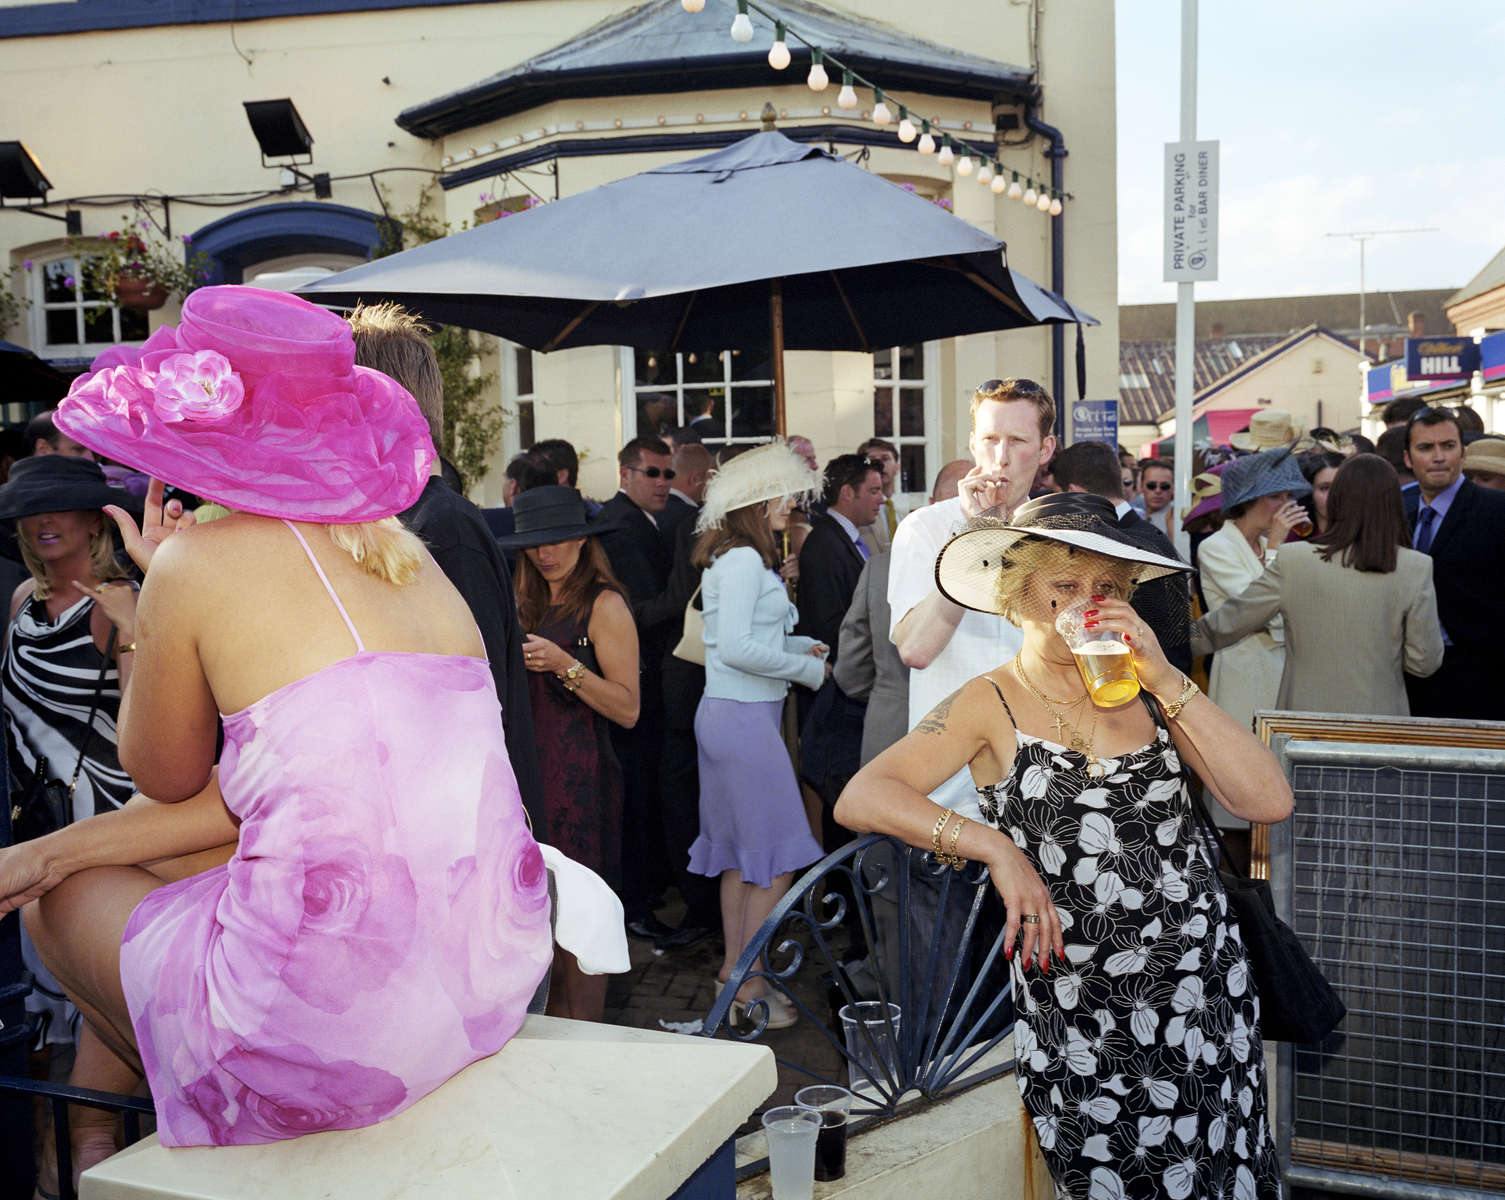 A woman dressed for Ladies Day drinks from a plastic pint glass outside a pub next to Royal Ascot Racecourse. June 2001